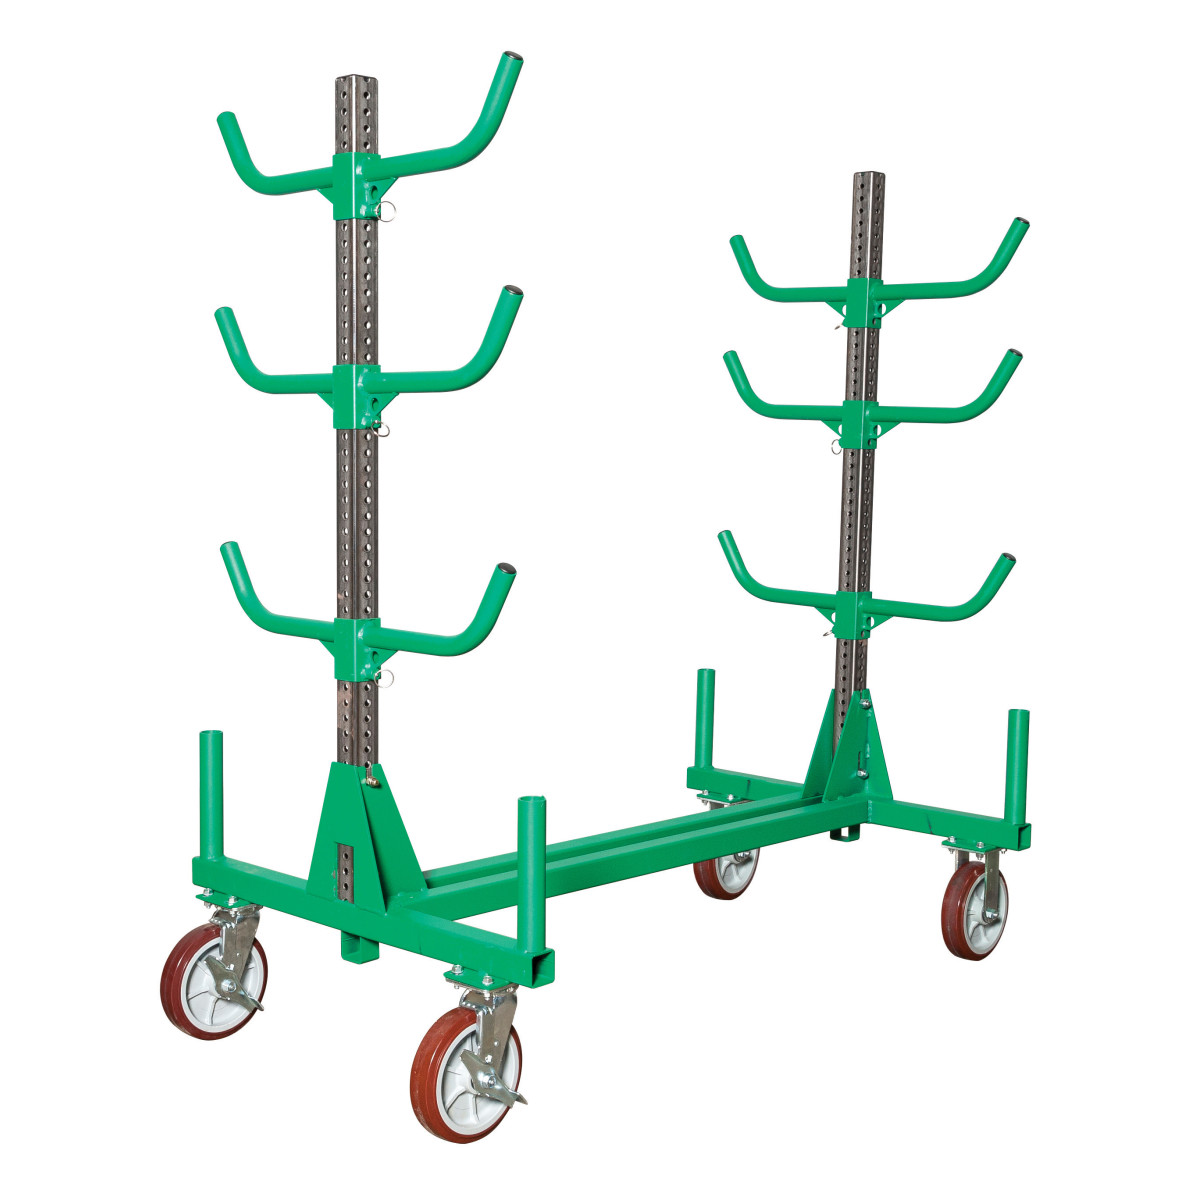 553-GRNL 783310056904 Specifically designed for prefabrication.  Eliminates use of pallets and reduces jobsite time handling waste.  Easily adjustable arms to accommodate various conduit offsets.  Foldable and stackable for easy shipping and storage.  Fits through 36” doorways.  500 lbs of capacity per arm.  No loose pieces.